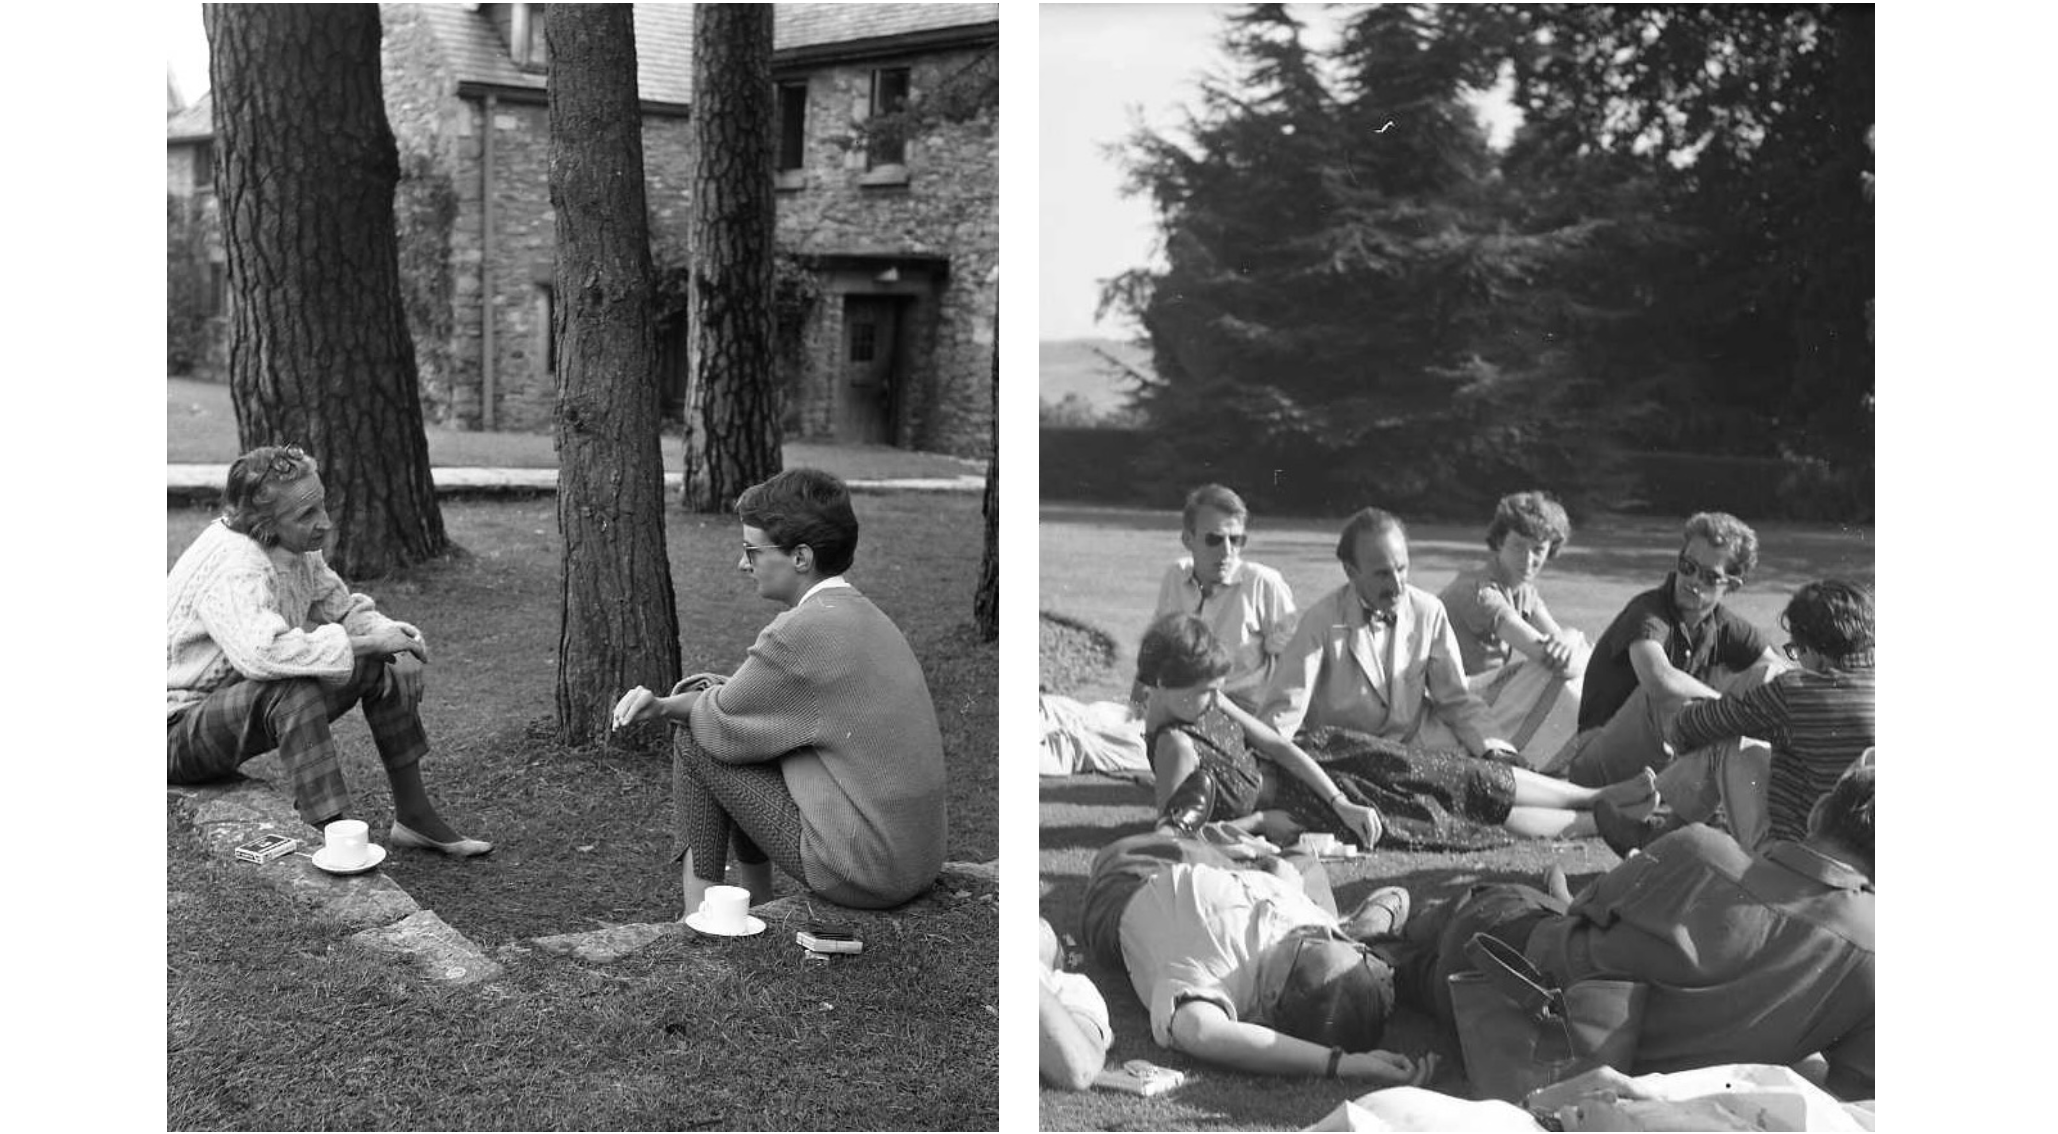 Two photos, one of a man and women, sitting on grassy stumps with cups and saucers, talking to each other, other photo of a group of people relaxing on grassy plain, with trees in the background.